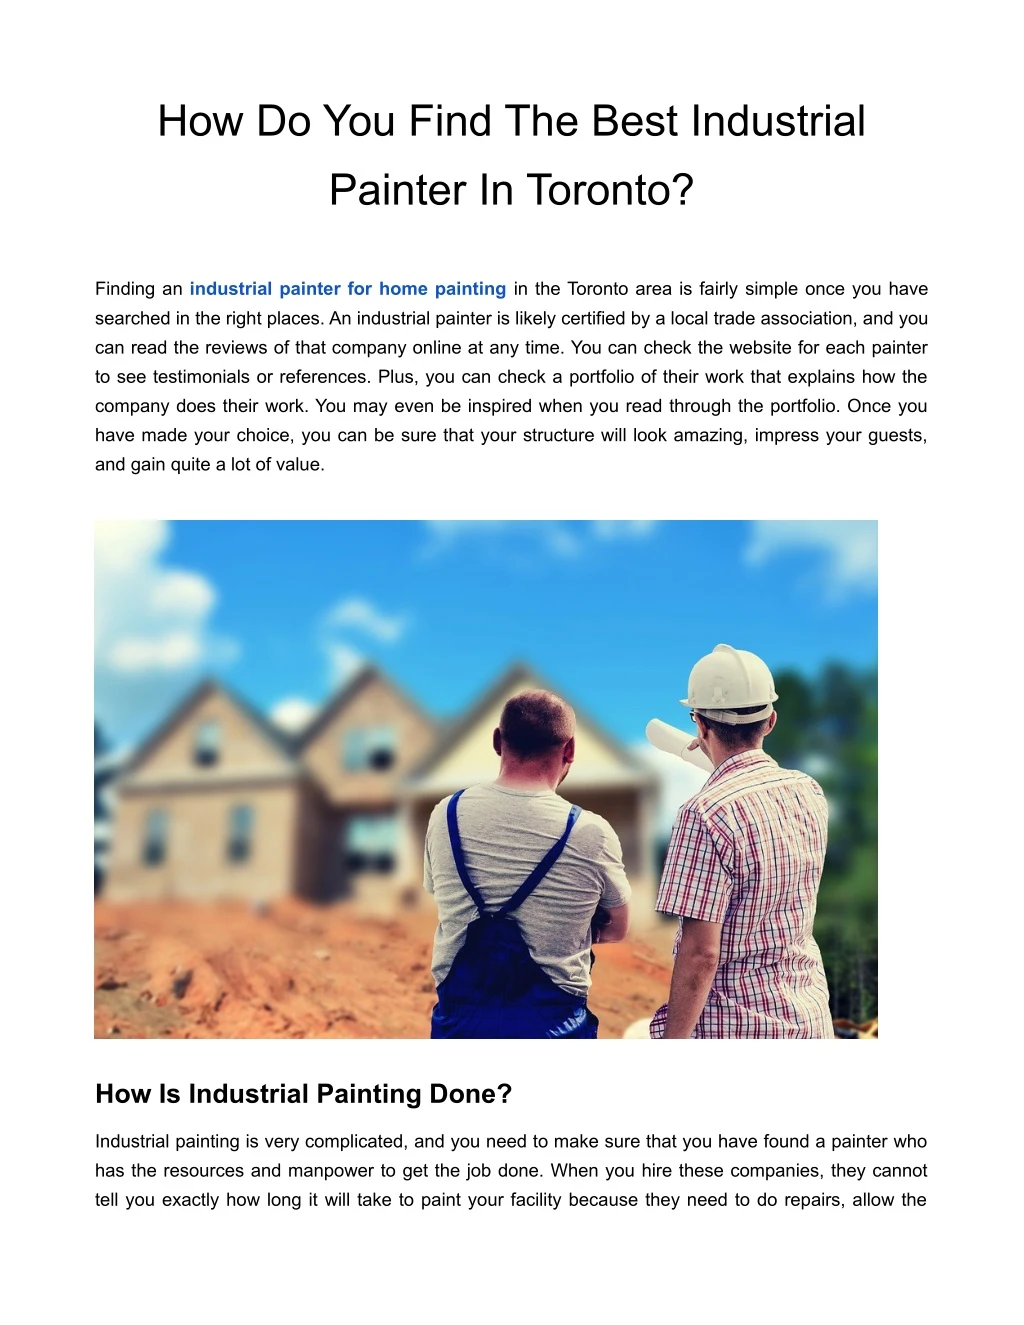 how do you find the best industrial painter